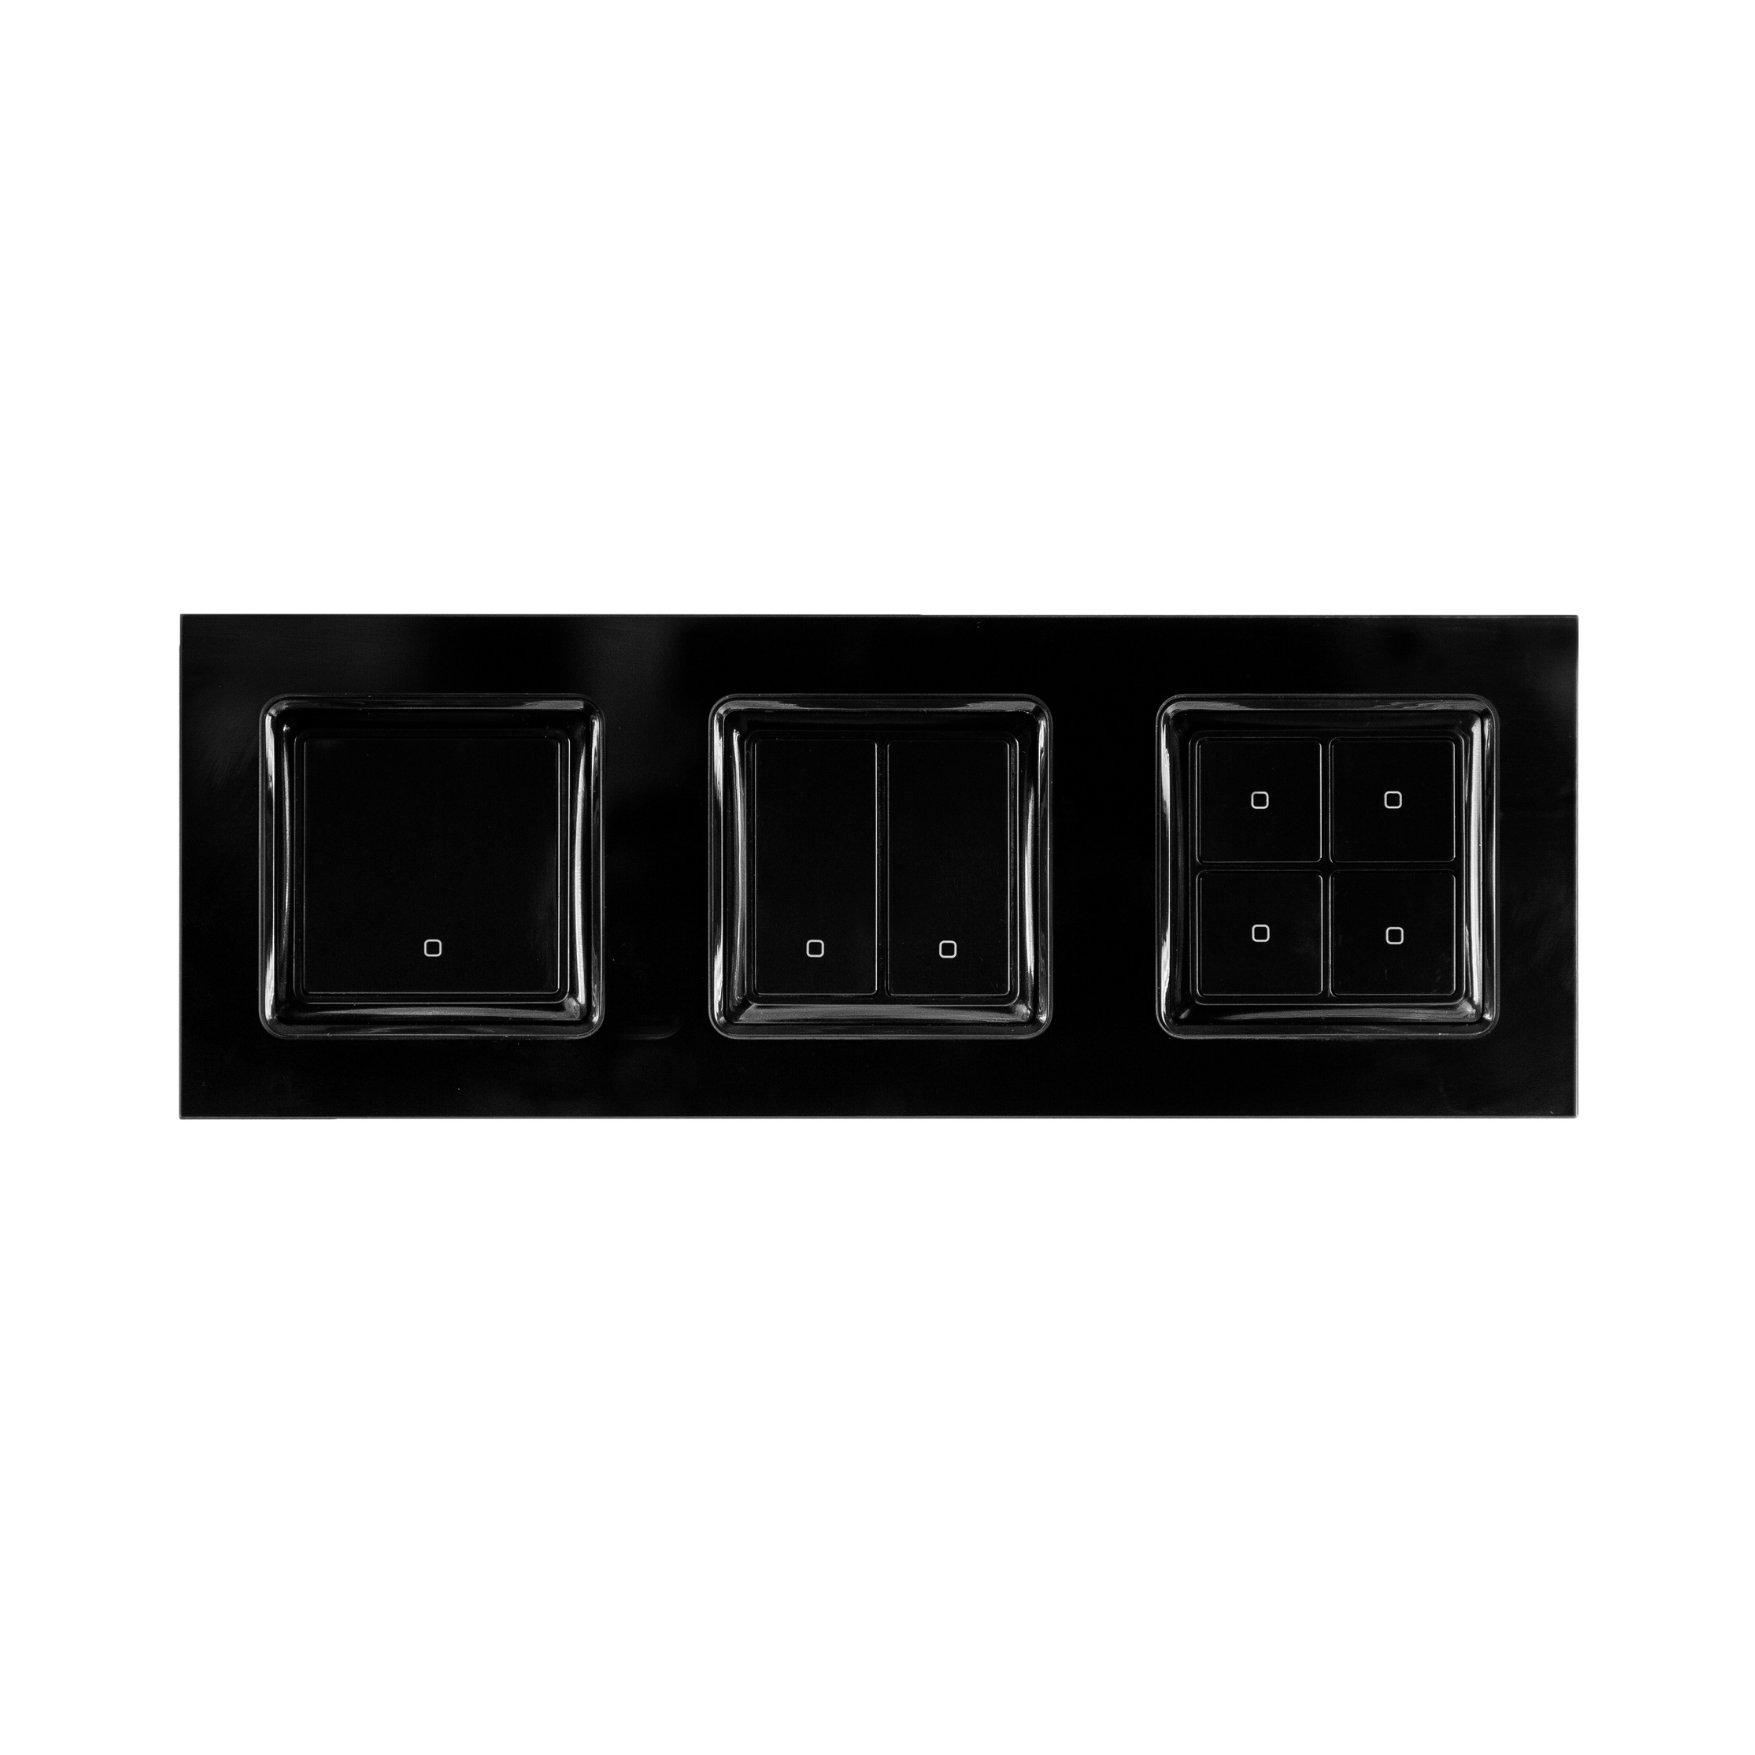 shelly/shelly-wall-switch-black-1-parent-img-22